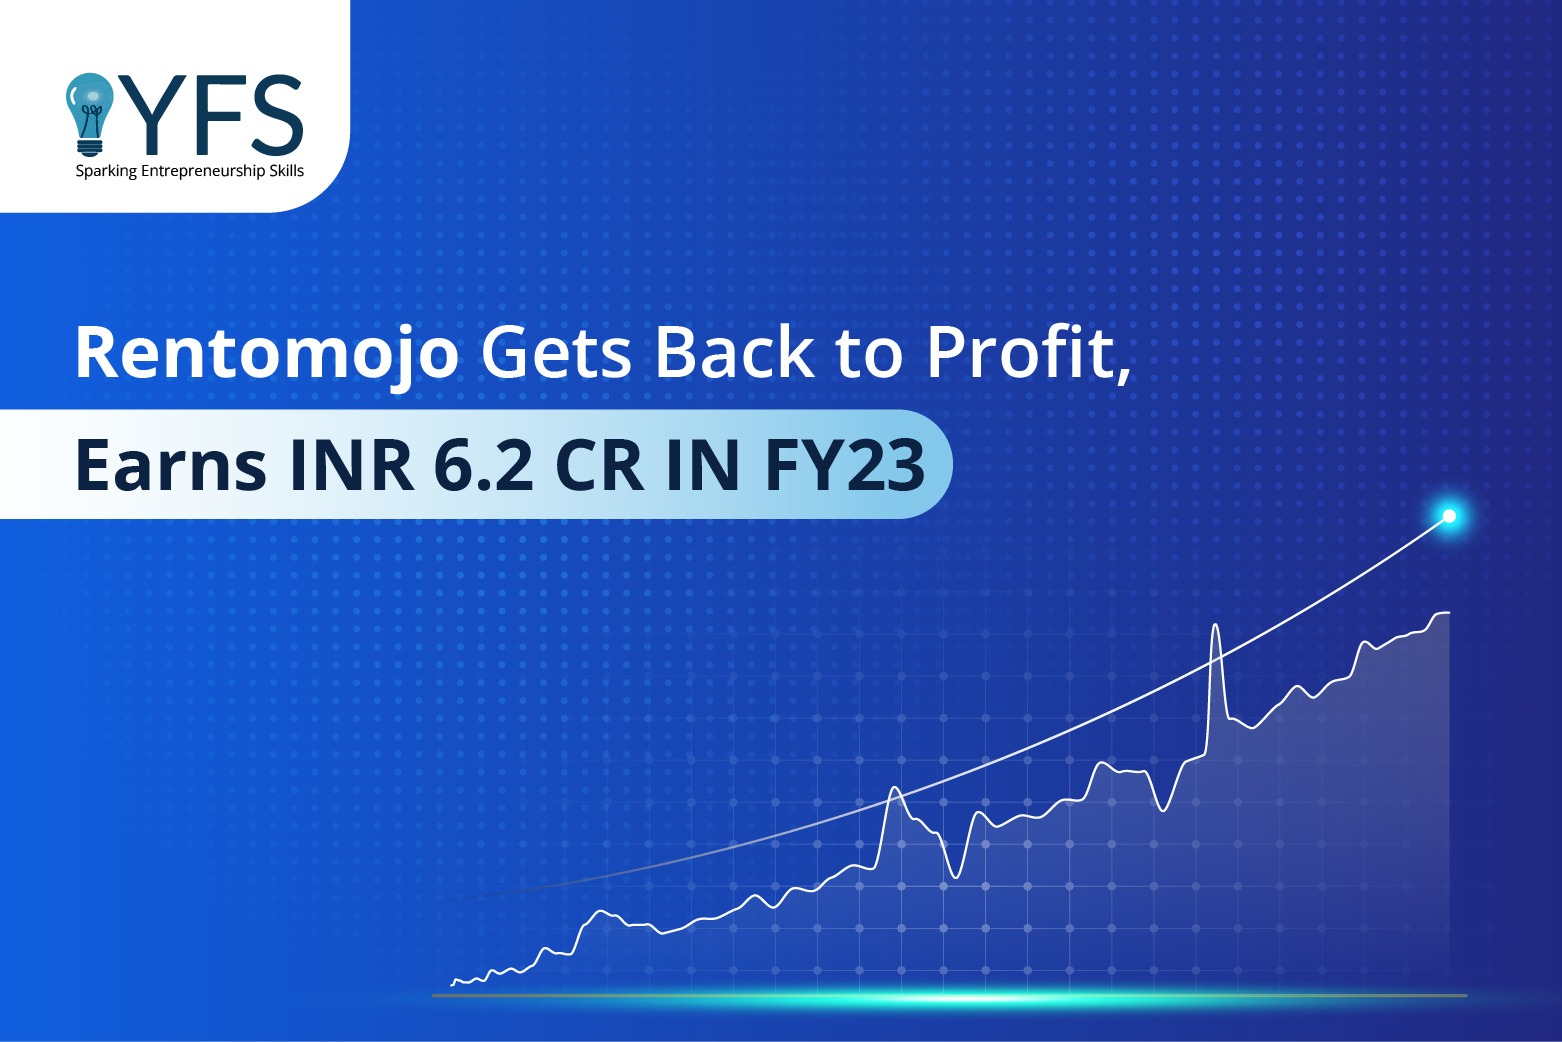 Rentomojo Gets Back to Profit, Earns INR 6.2 CR IN FY23